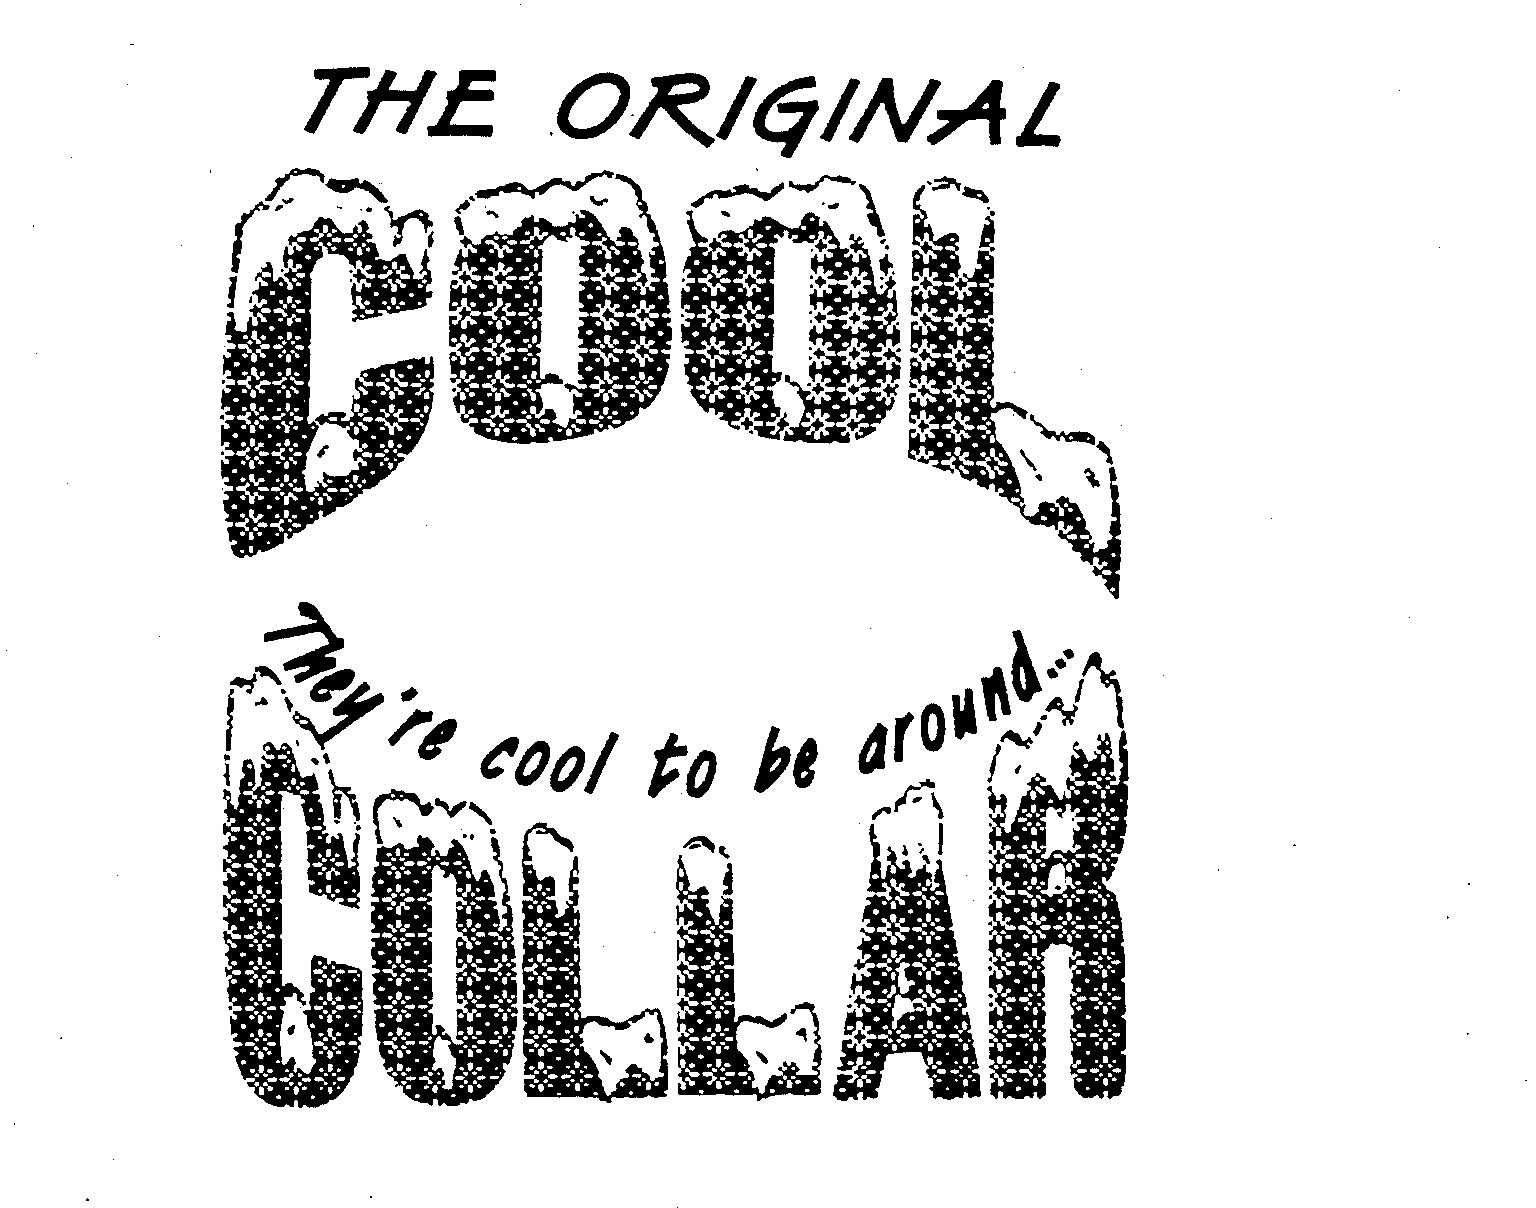  THE ORIGINAL COOL THEY'RE COOL TO BE AROUND COLLAR